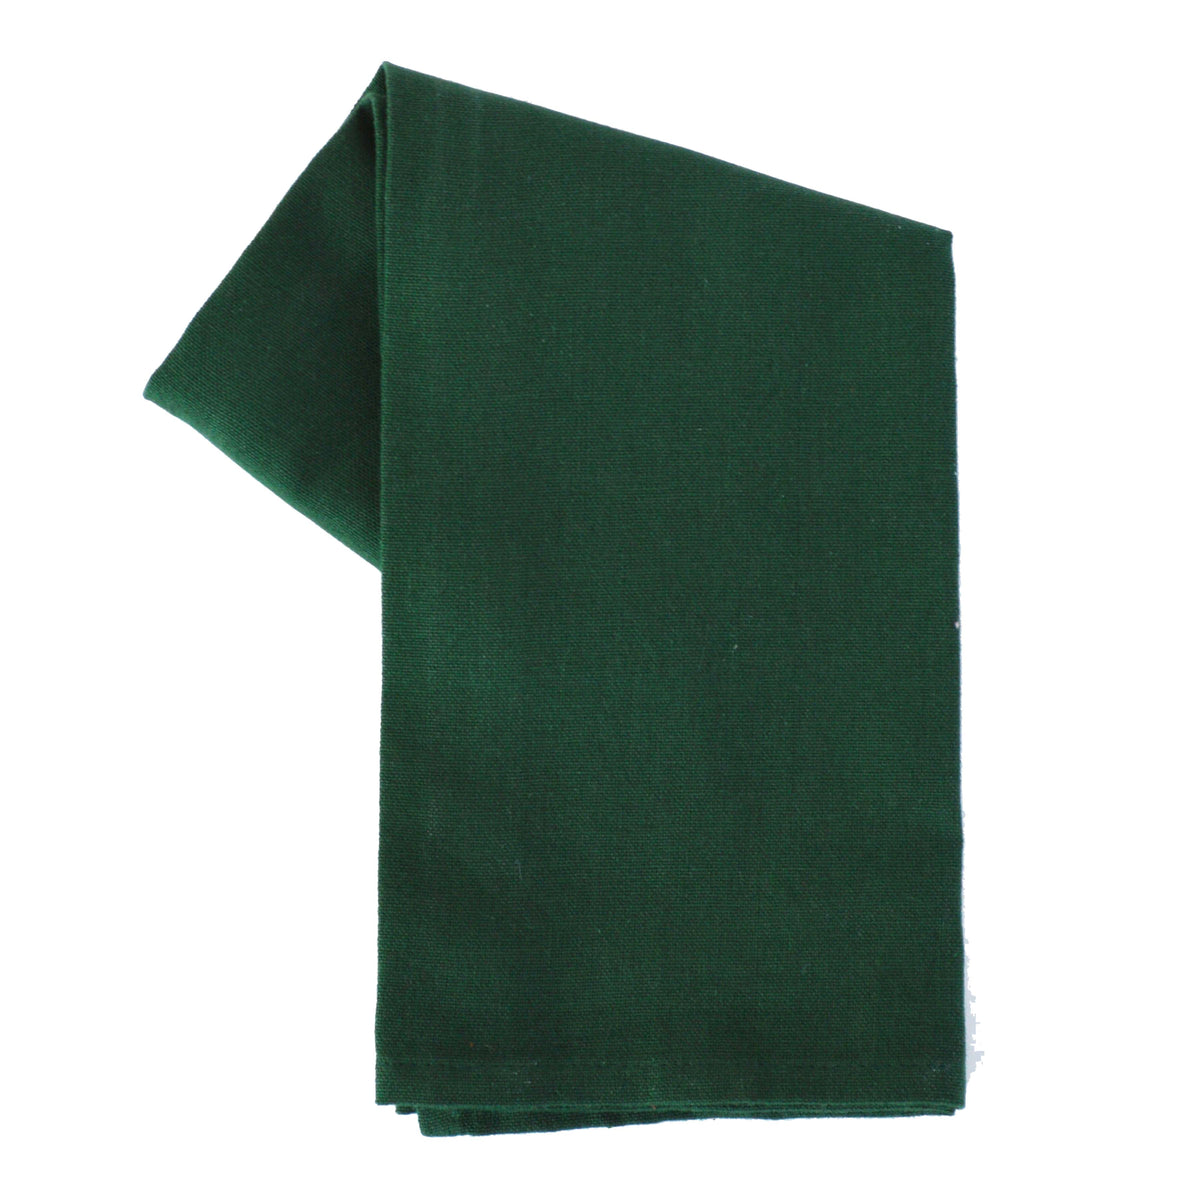 St. Patrick's Day Seasonal Towel Set of 3 - Green and White